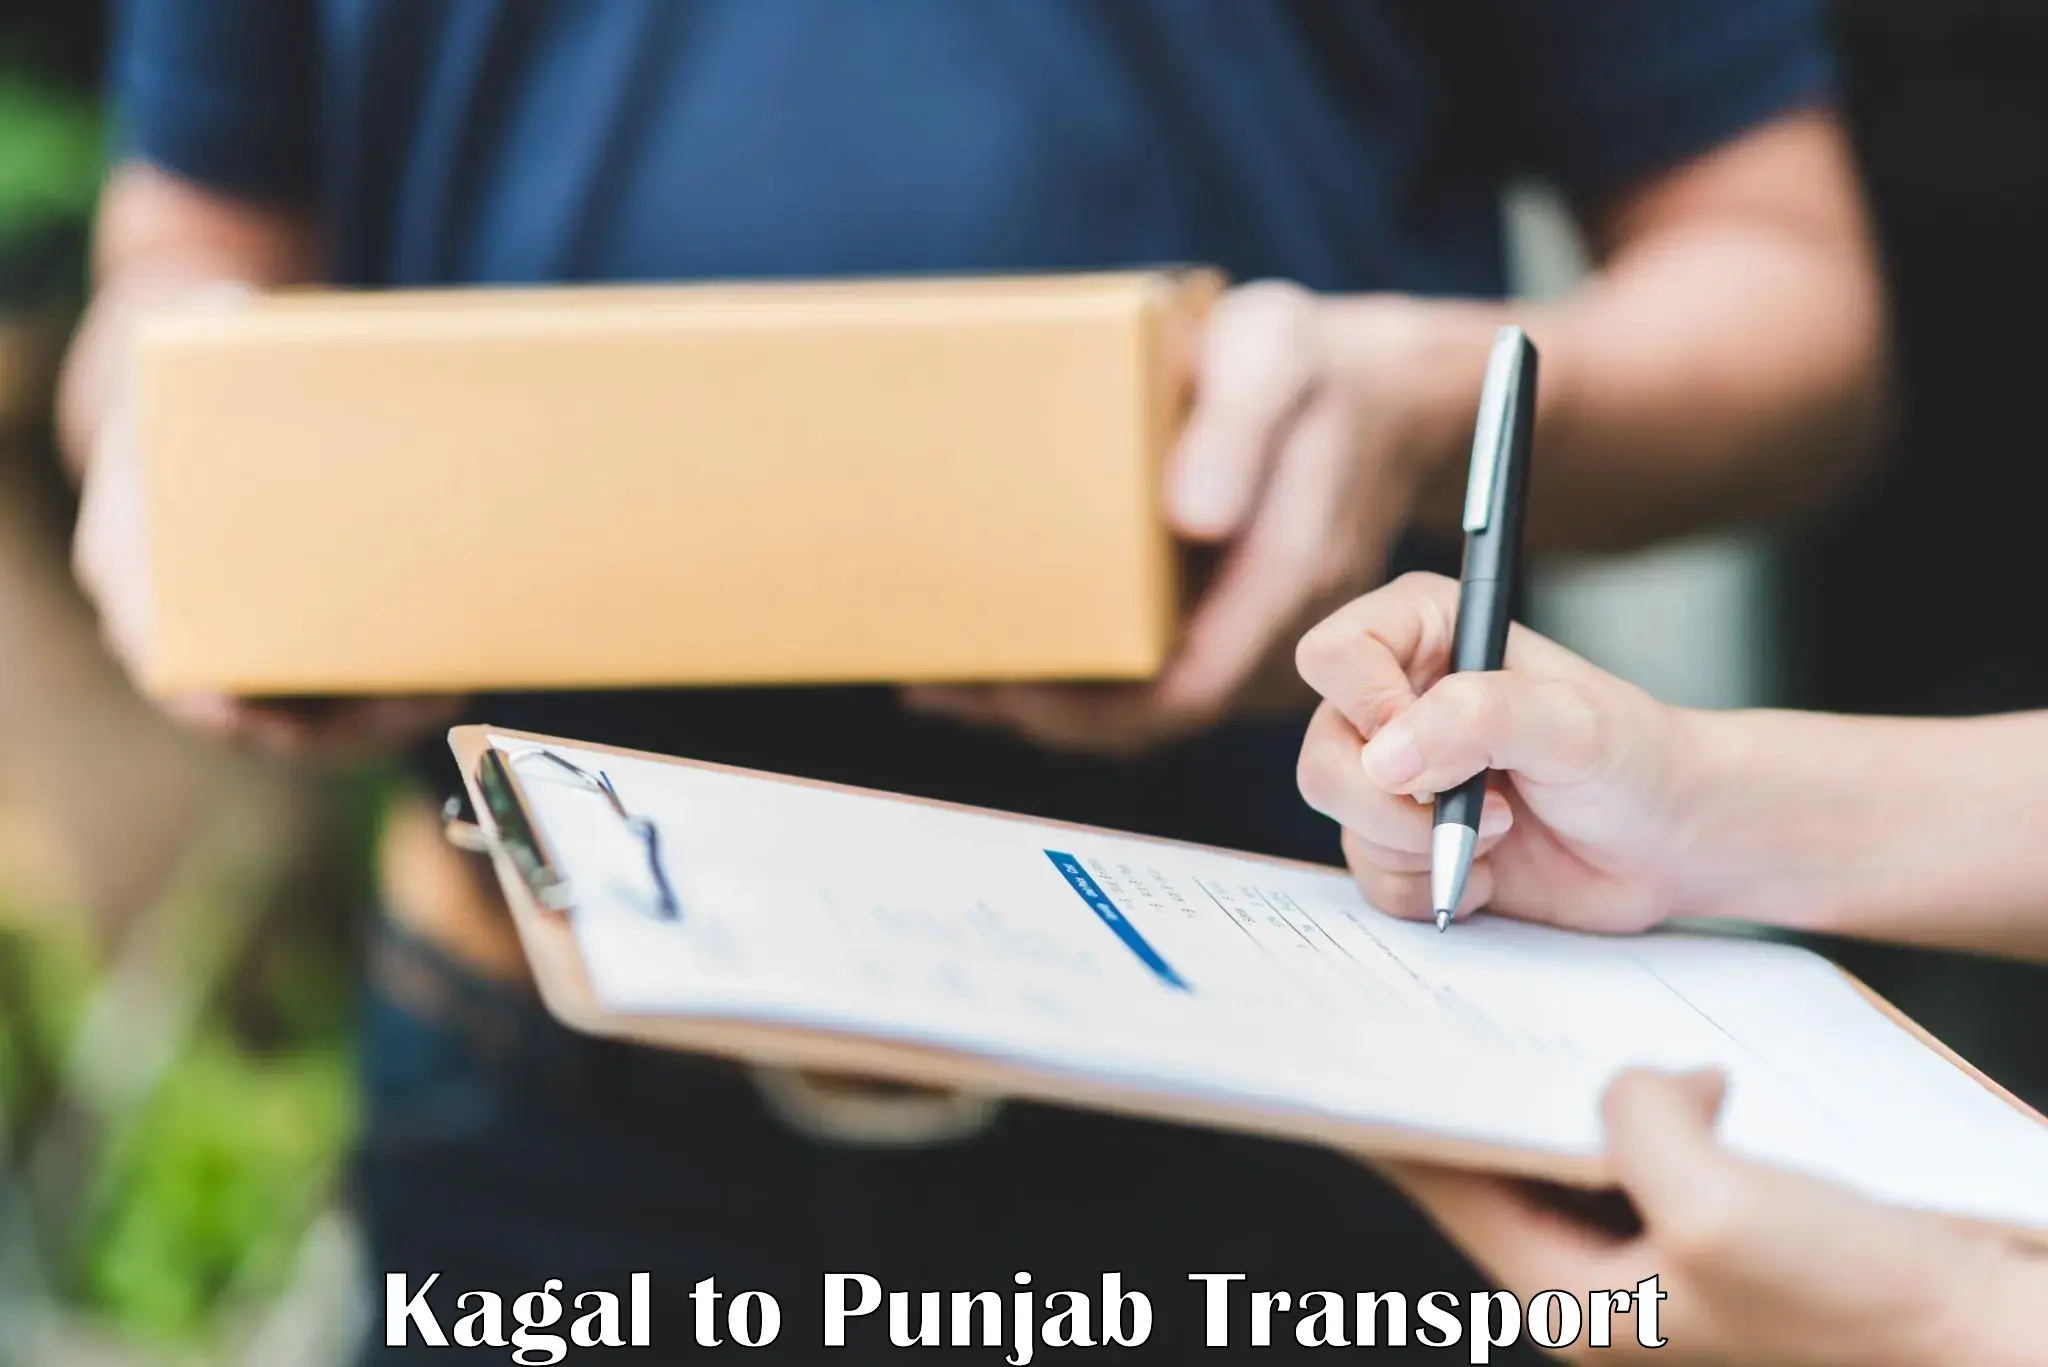 Goods delivery service Kagal to Punjab